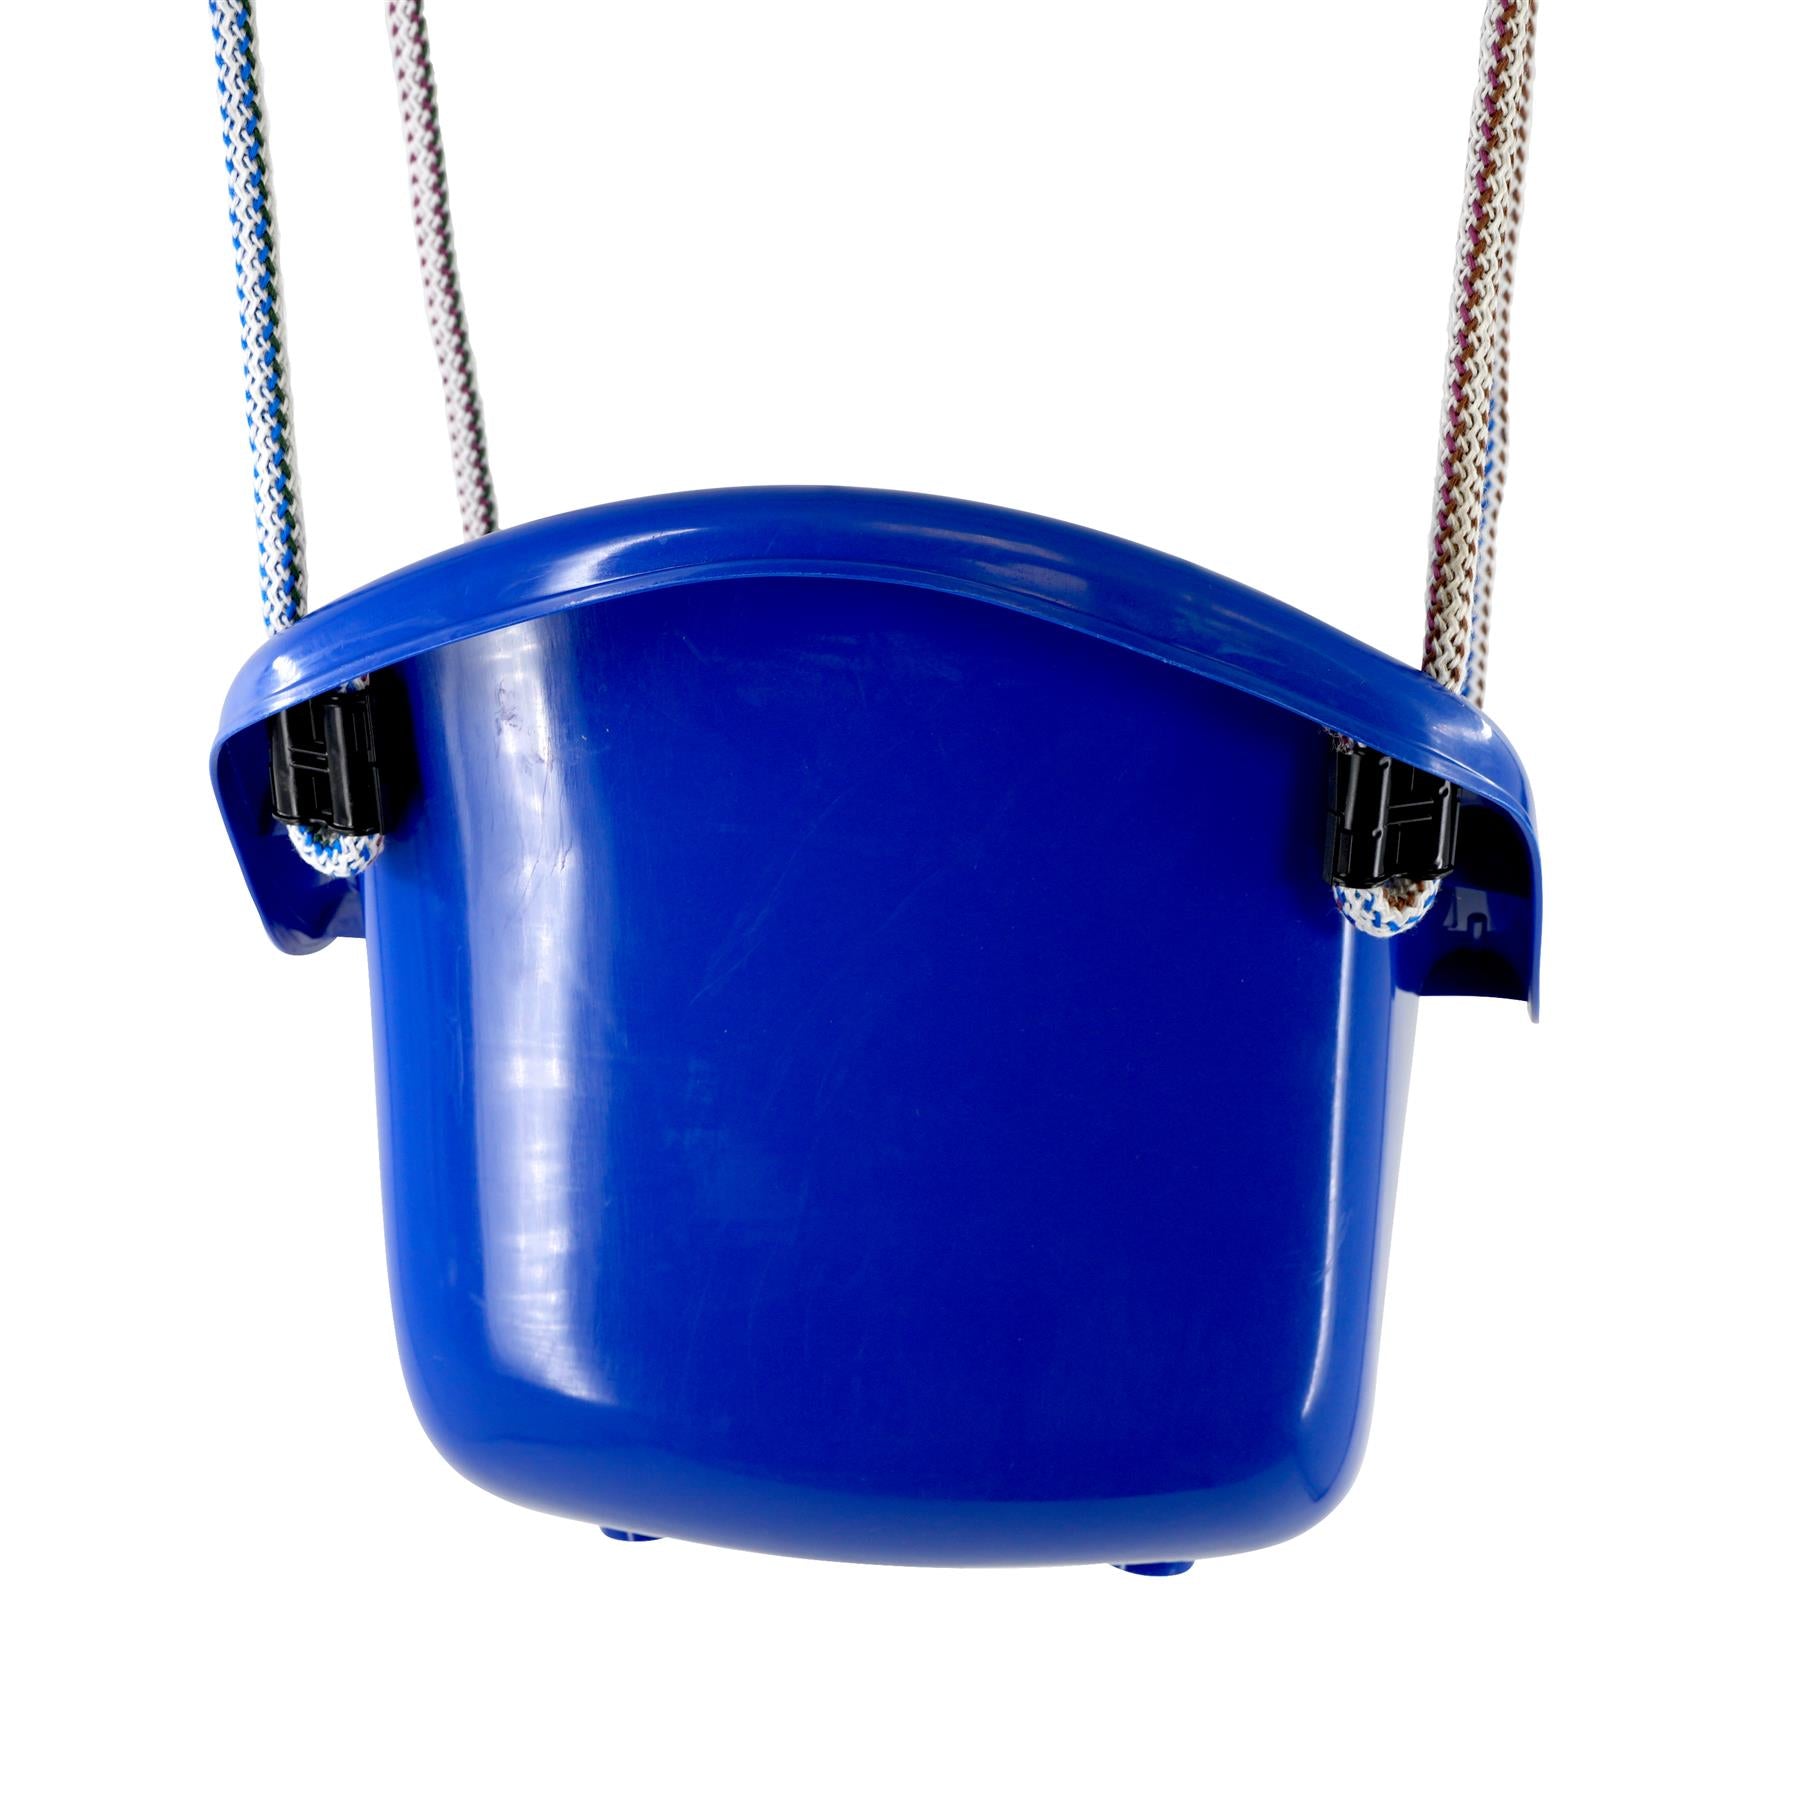 Blue Children's Safety Swing Seat by MTS - The Magic Toy Shop